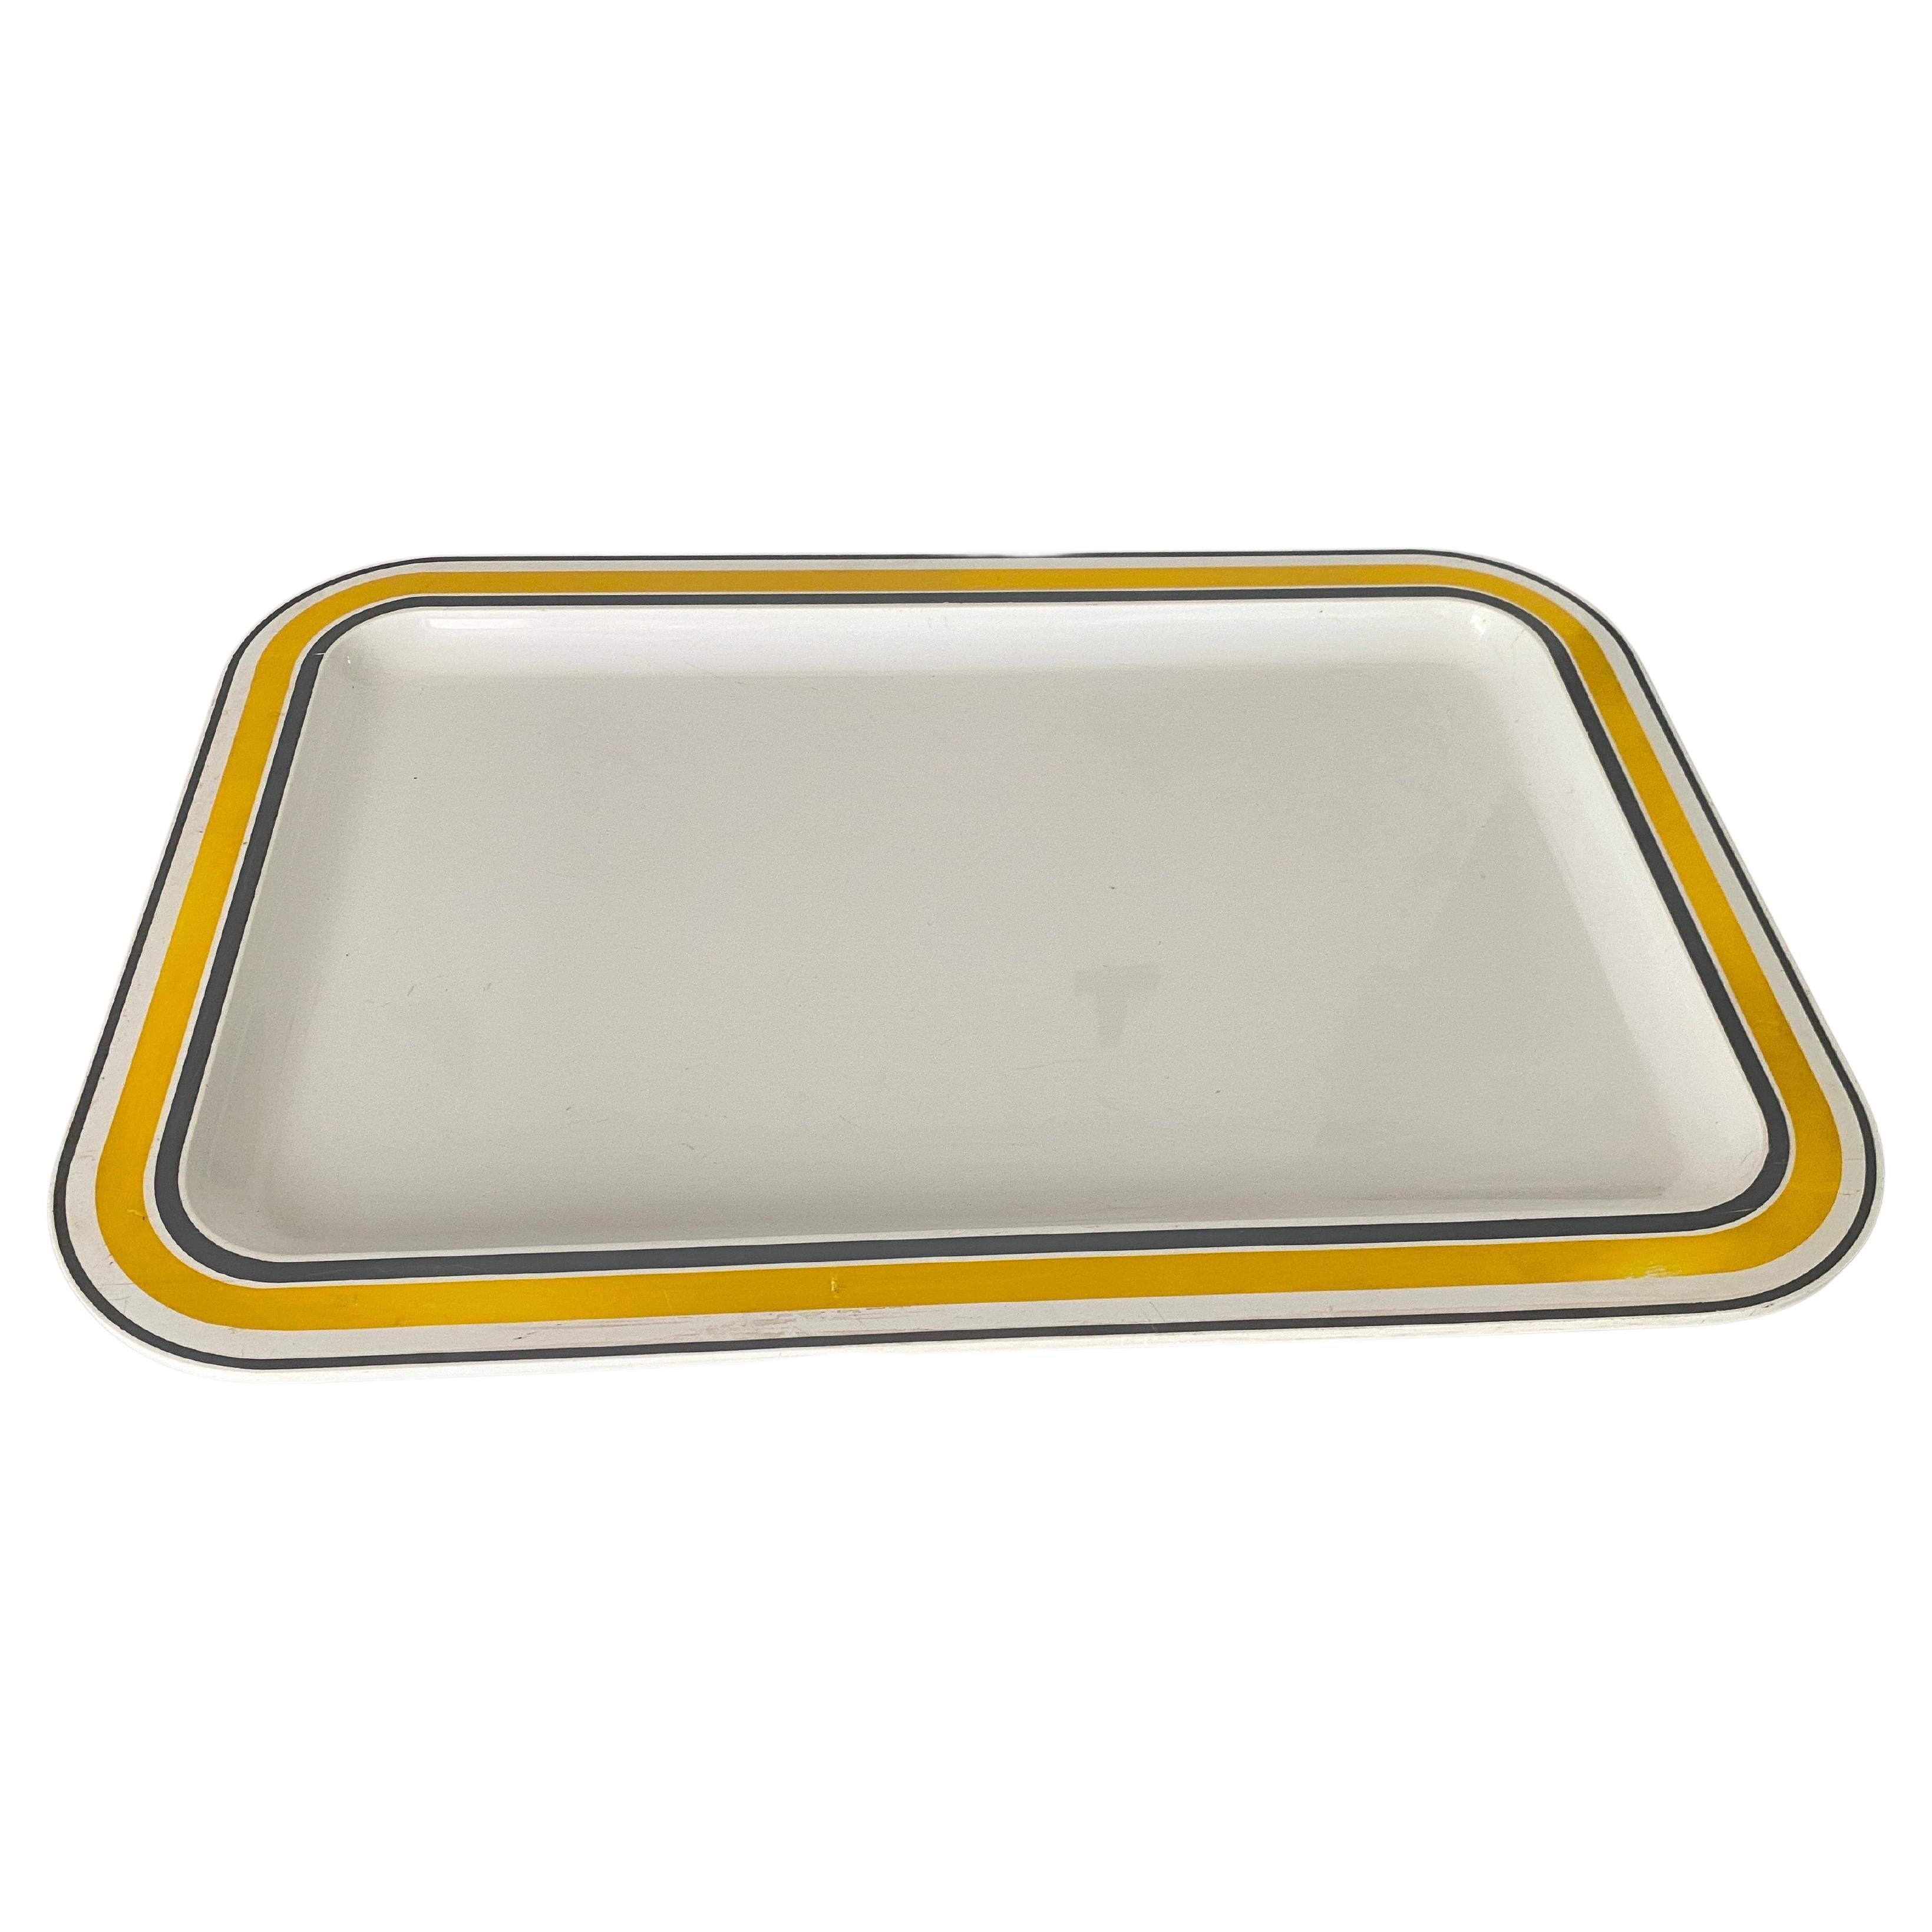 Plastic Tray France 1970s White yellow and grey Color For Sale